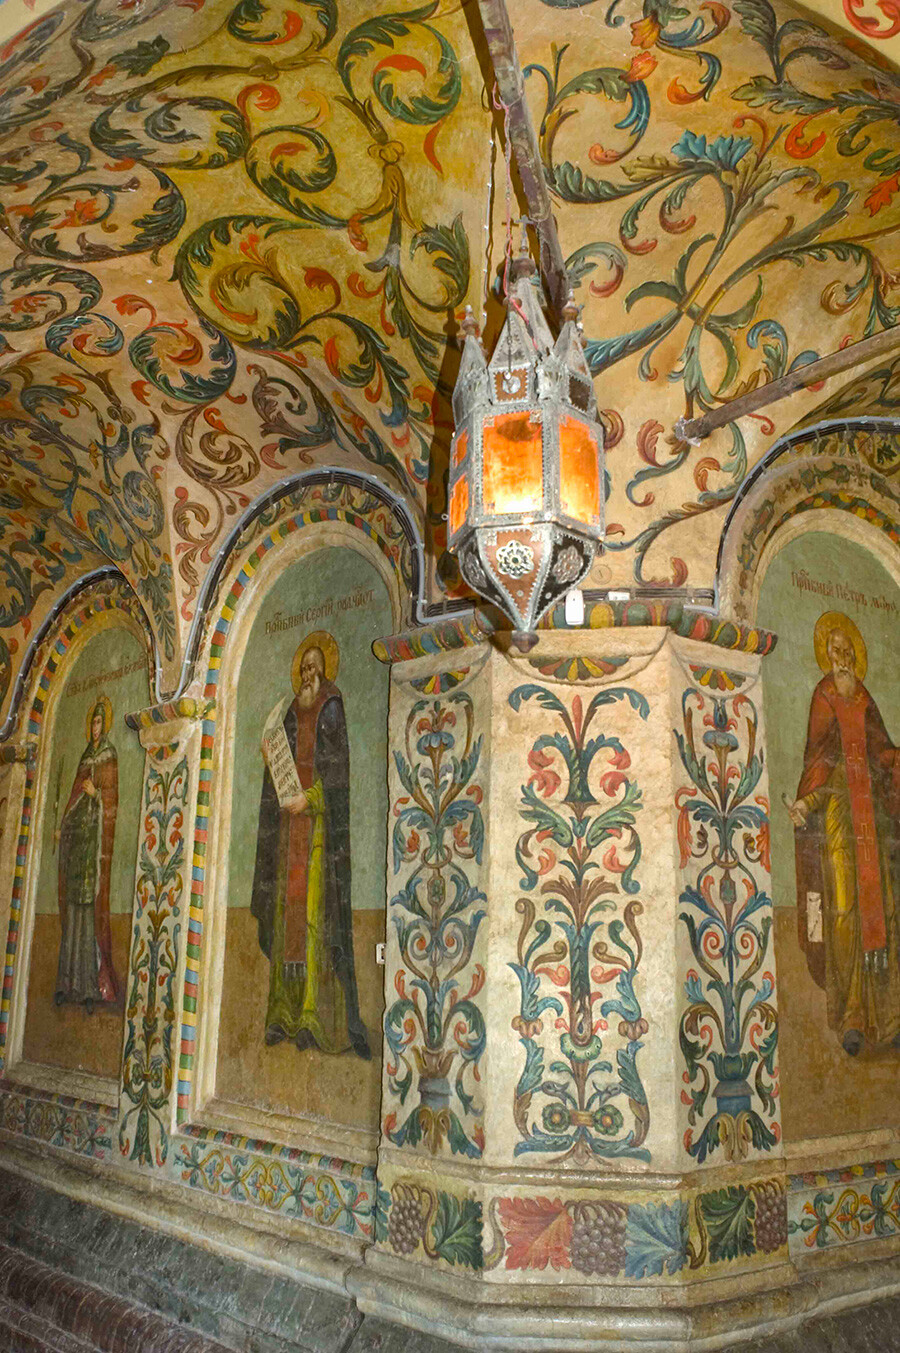 St. Basil's, interior. South gallery passage with 18th-century wall paintings. From left: St. Catherine, St. Sergius of Radonezh, Metropolitan Peter. June 2, 2012.